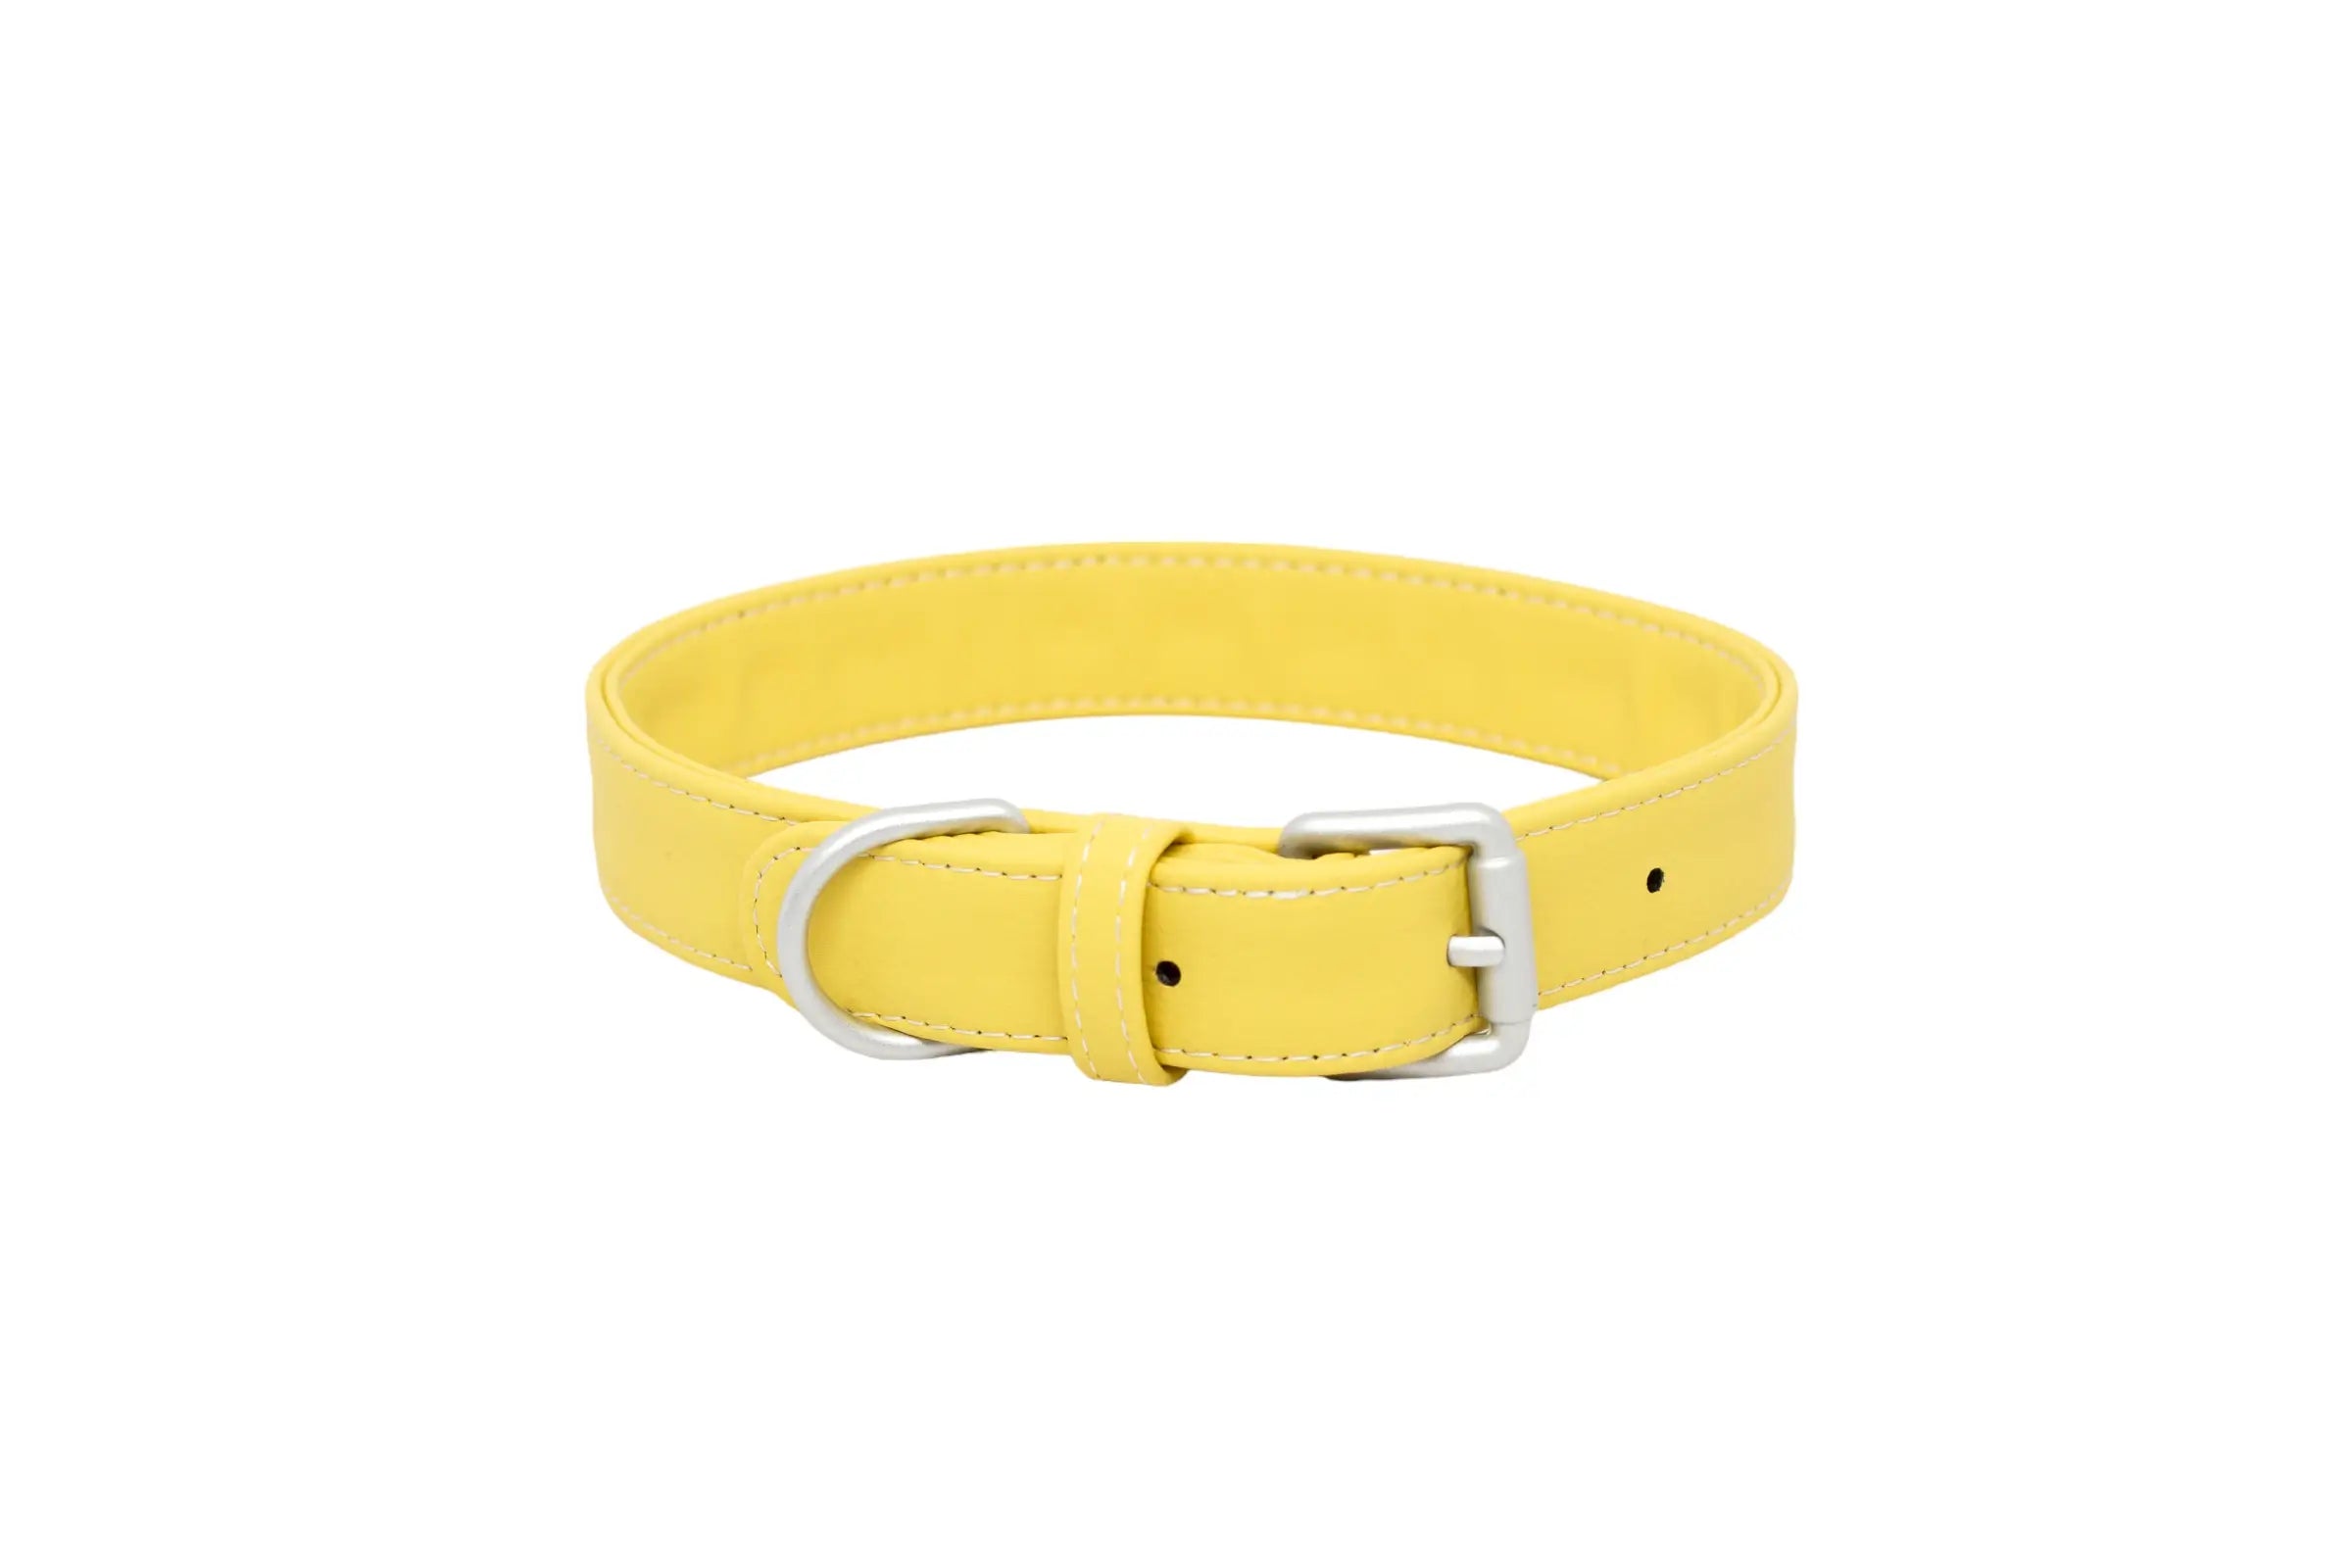 Front of a waterproof and durable dog collar with marine grade anodized aluminum hardware in the color honey yellow.